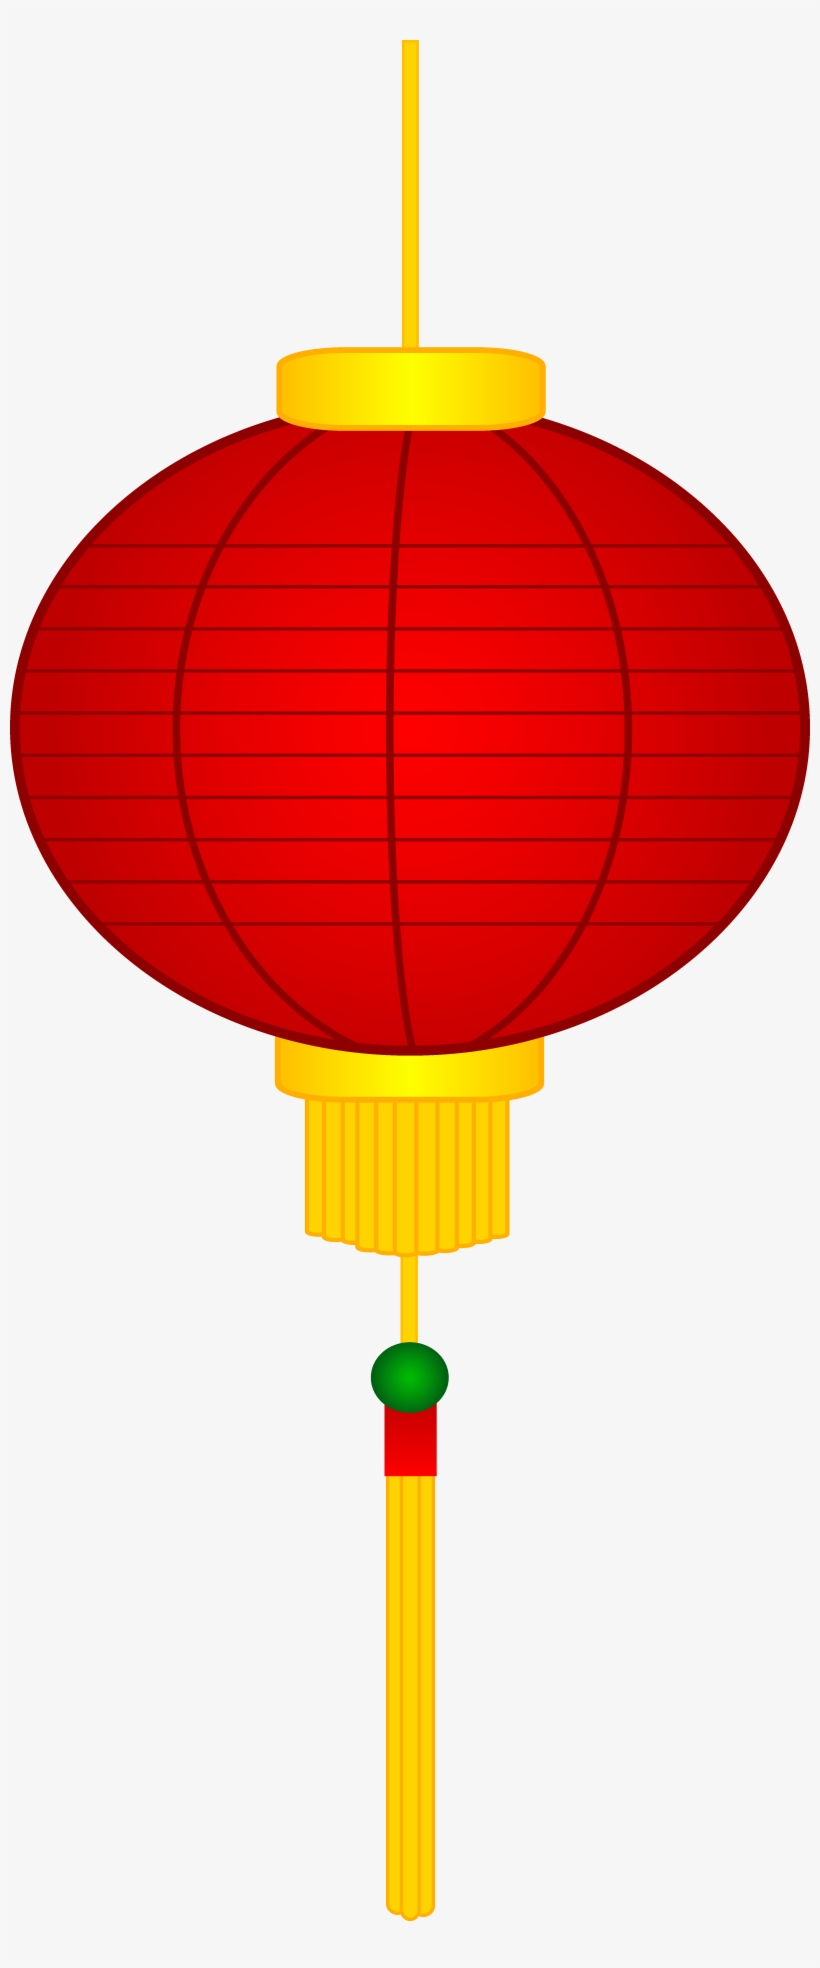 Red Chinese Free Clip Art - Chinese Red Lantern Clip Art, transparent png #280333